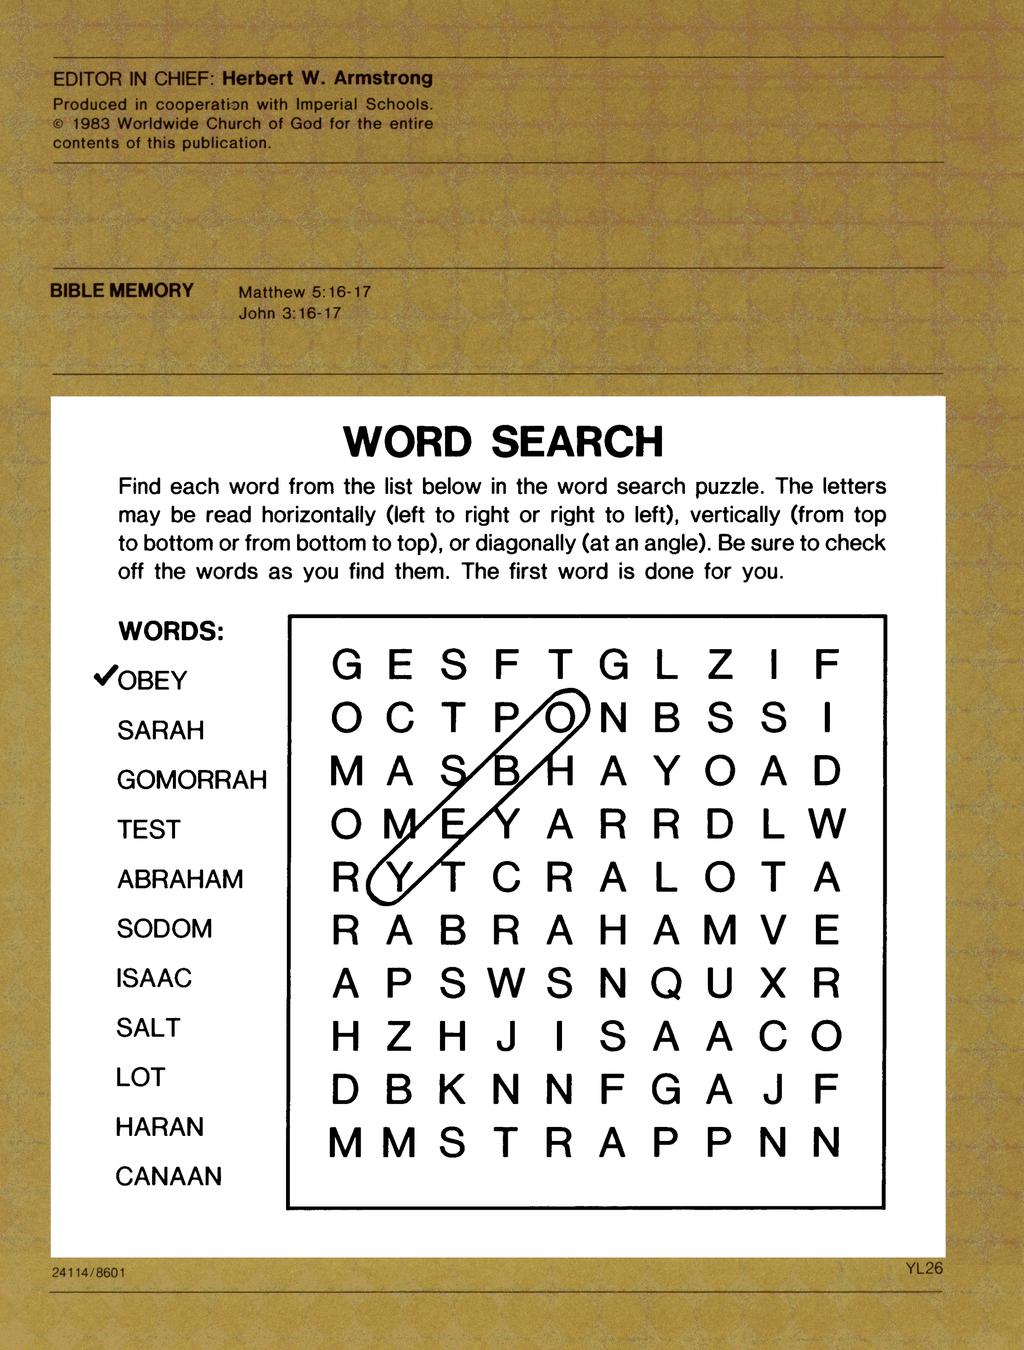 WORD SEARCH Find each word from the list below in the word search puzzle.